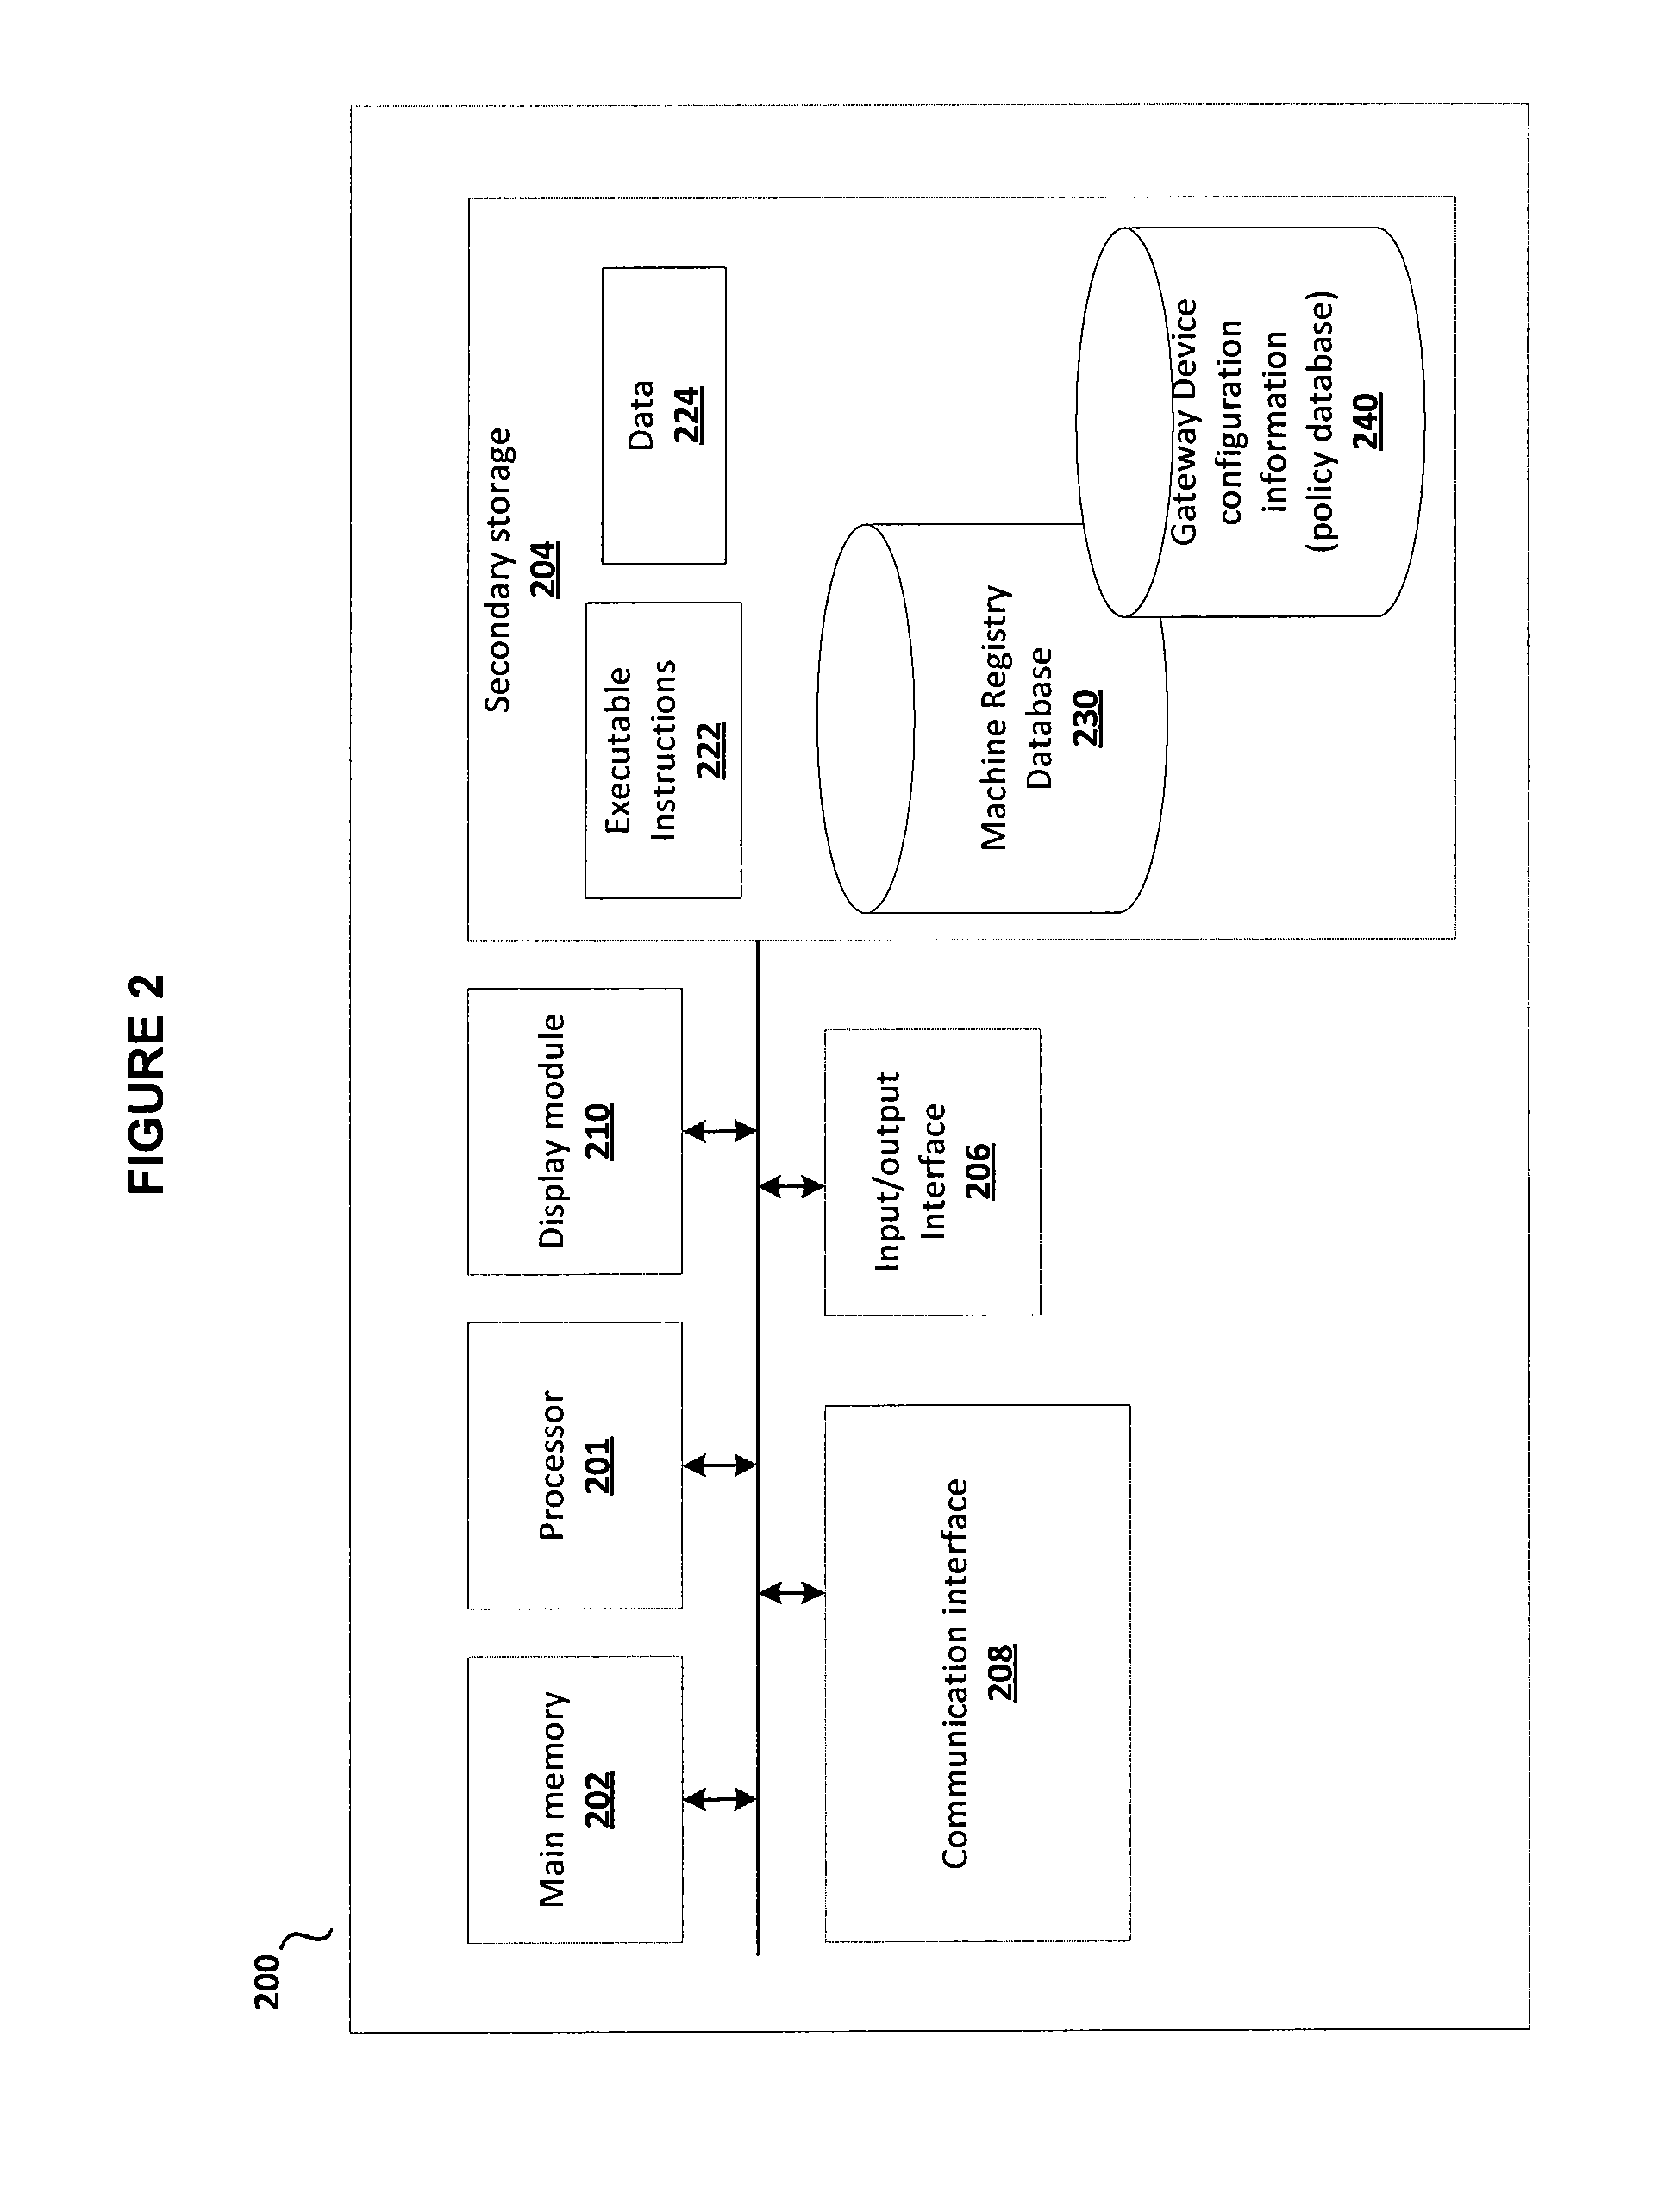 System and method for secure machine-to-machine communications